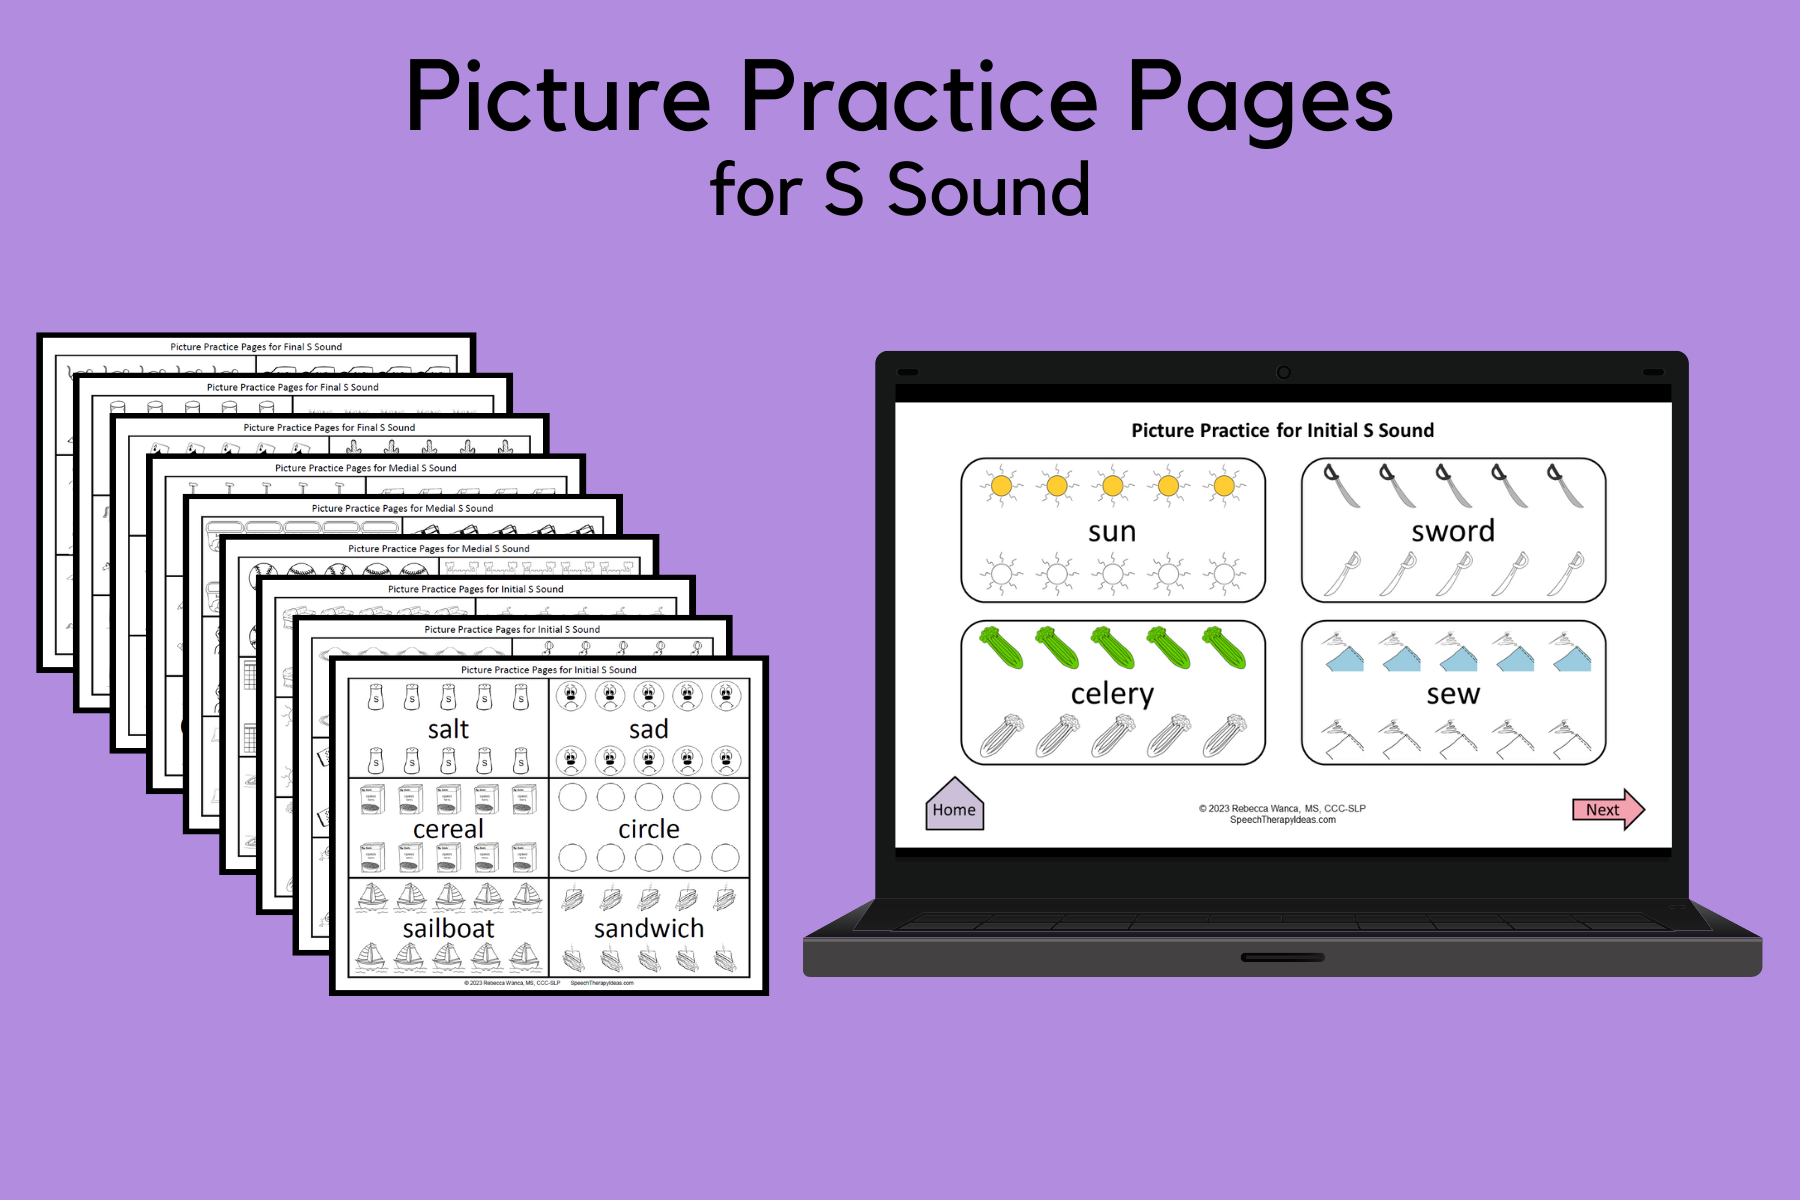 Picture Practice Pages for S Sound